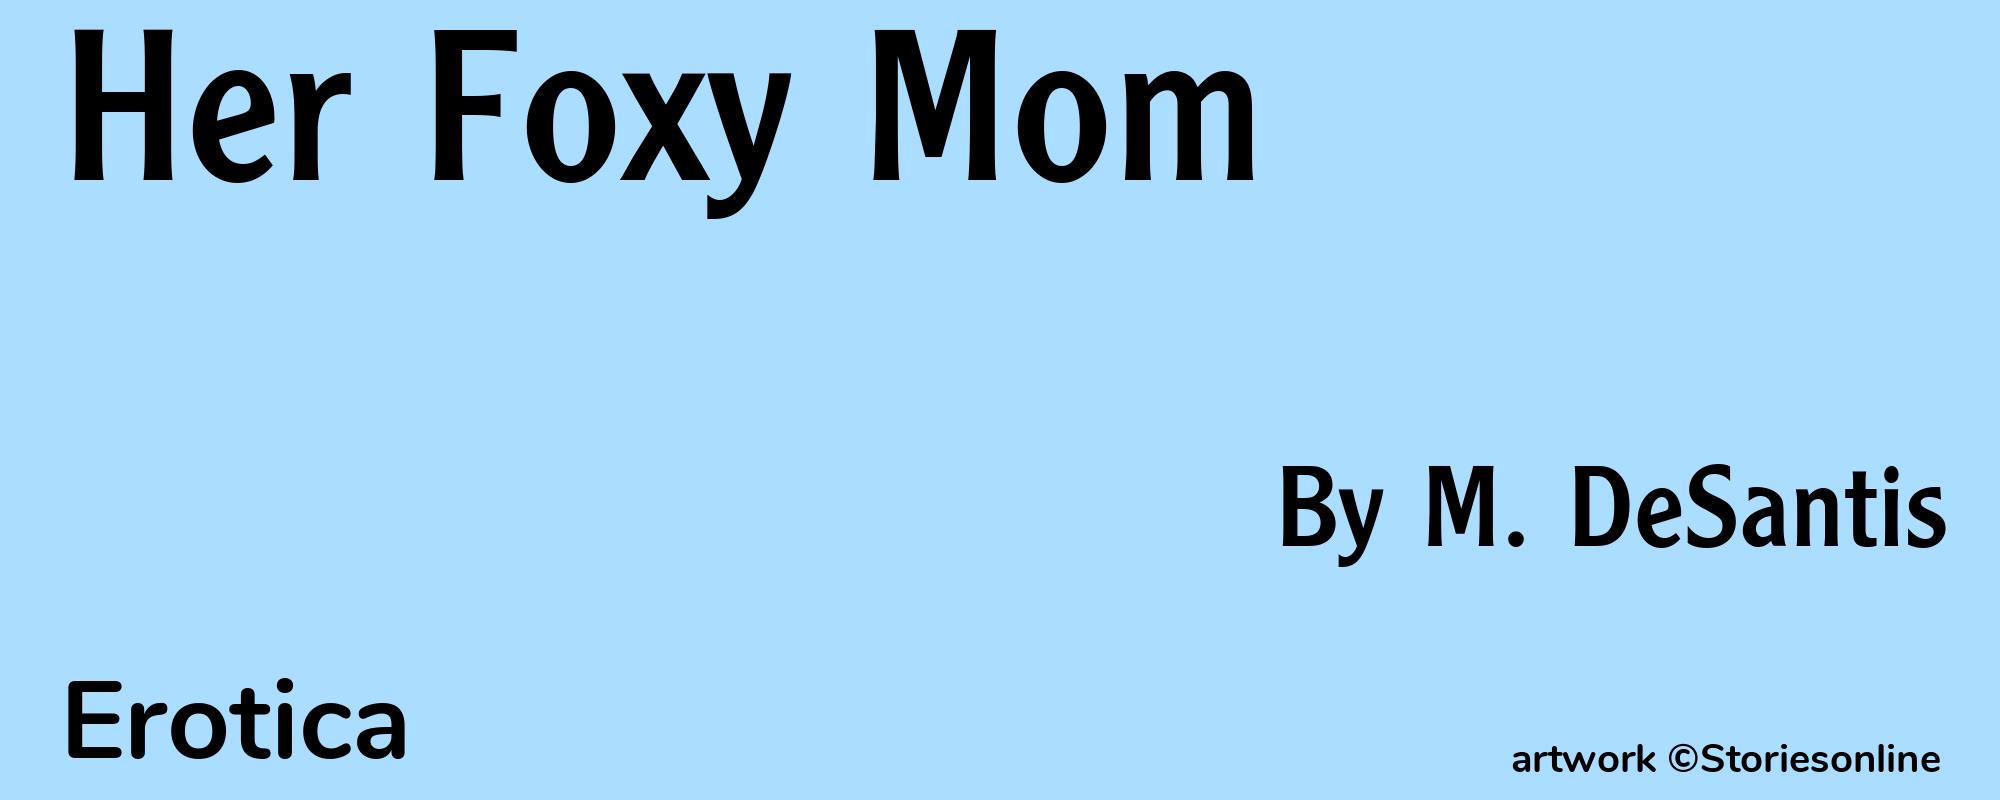 Her Foxy Mom - Cover